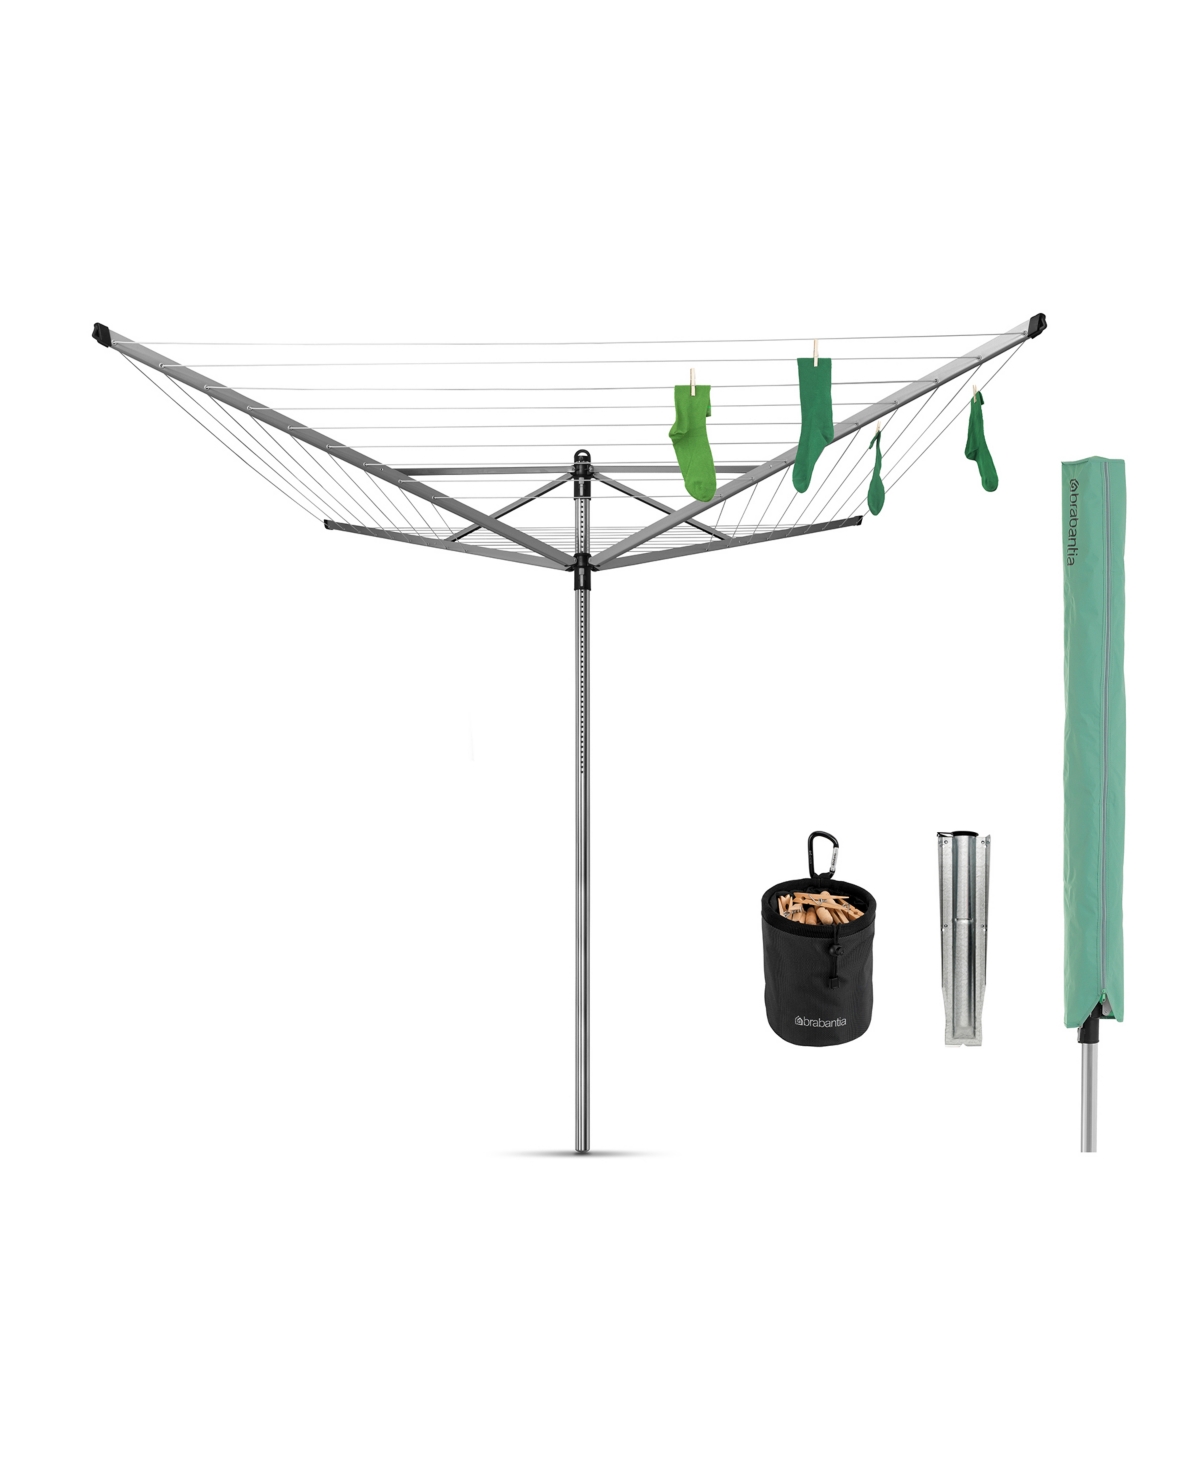 Rotary Lift-o-Matic Clothesline - 164', 50 Meter with Metal Ground Spike, Protective Cover, Peg Bag and Wooden Clothespins Set - Metallic Gray